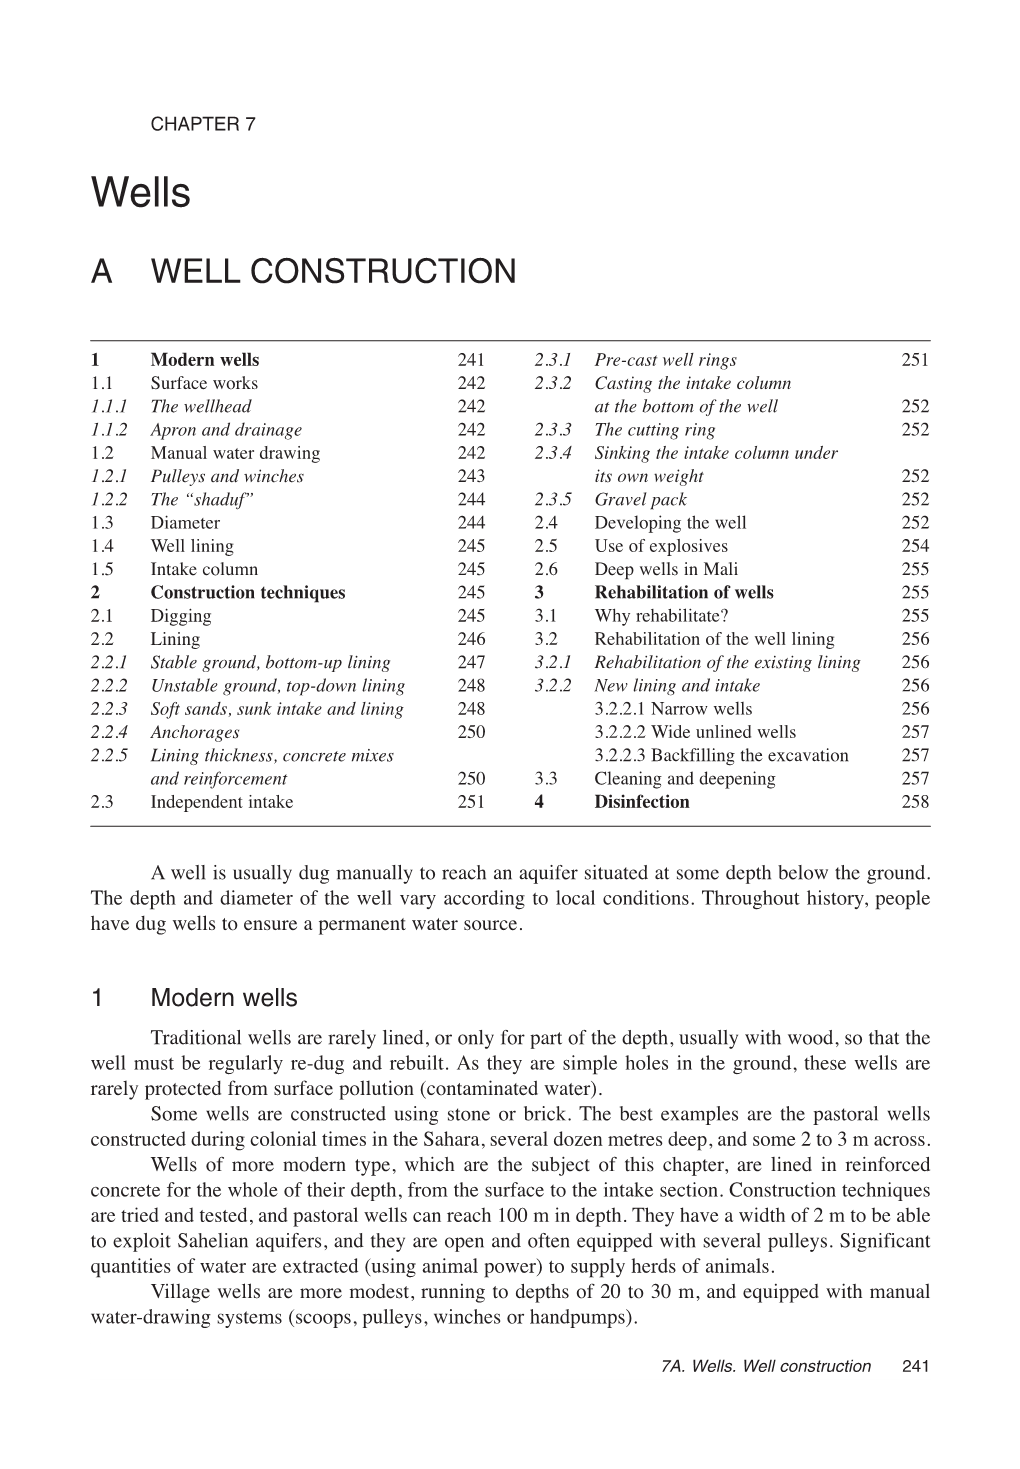 A. Well Constructions